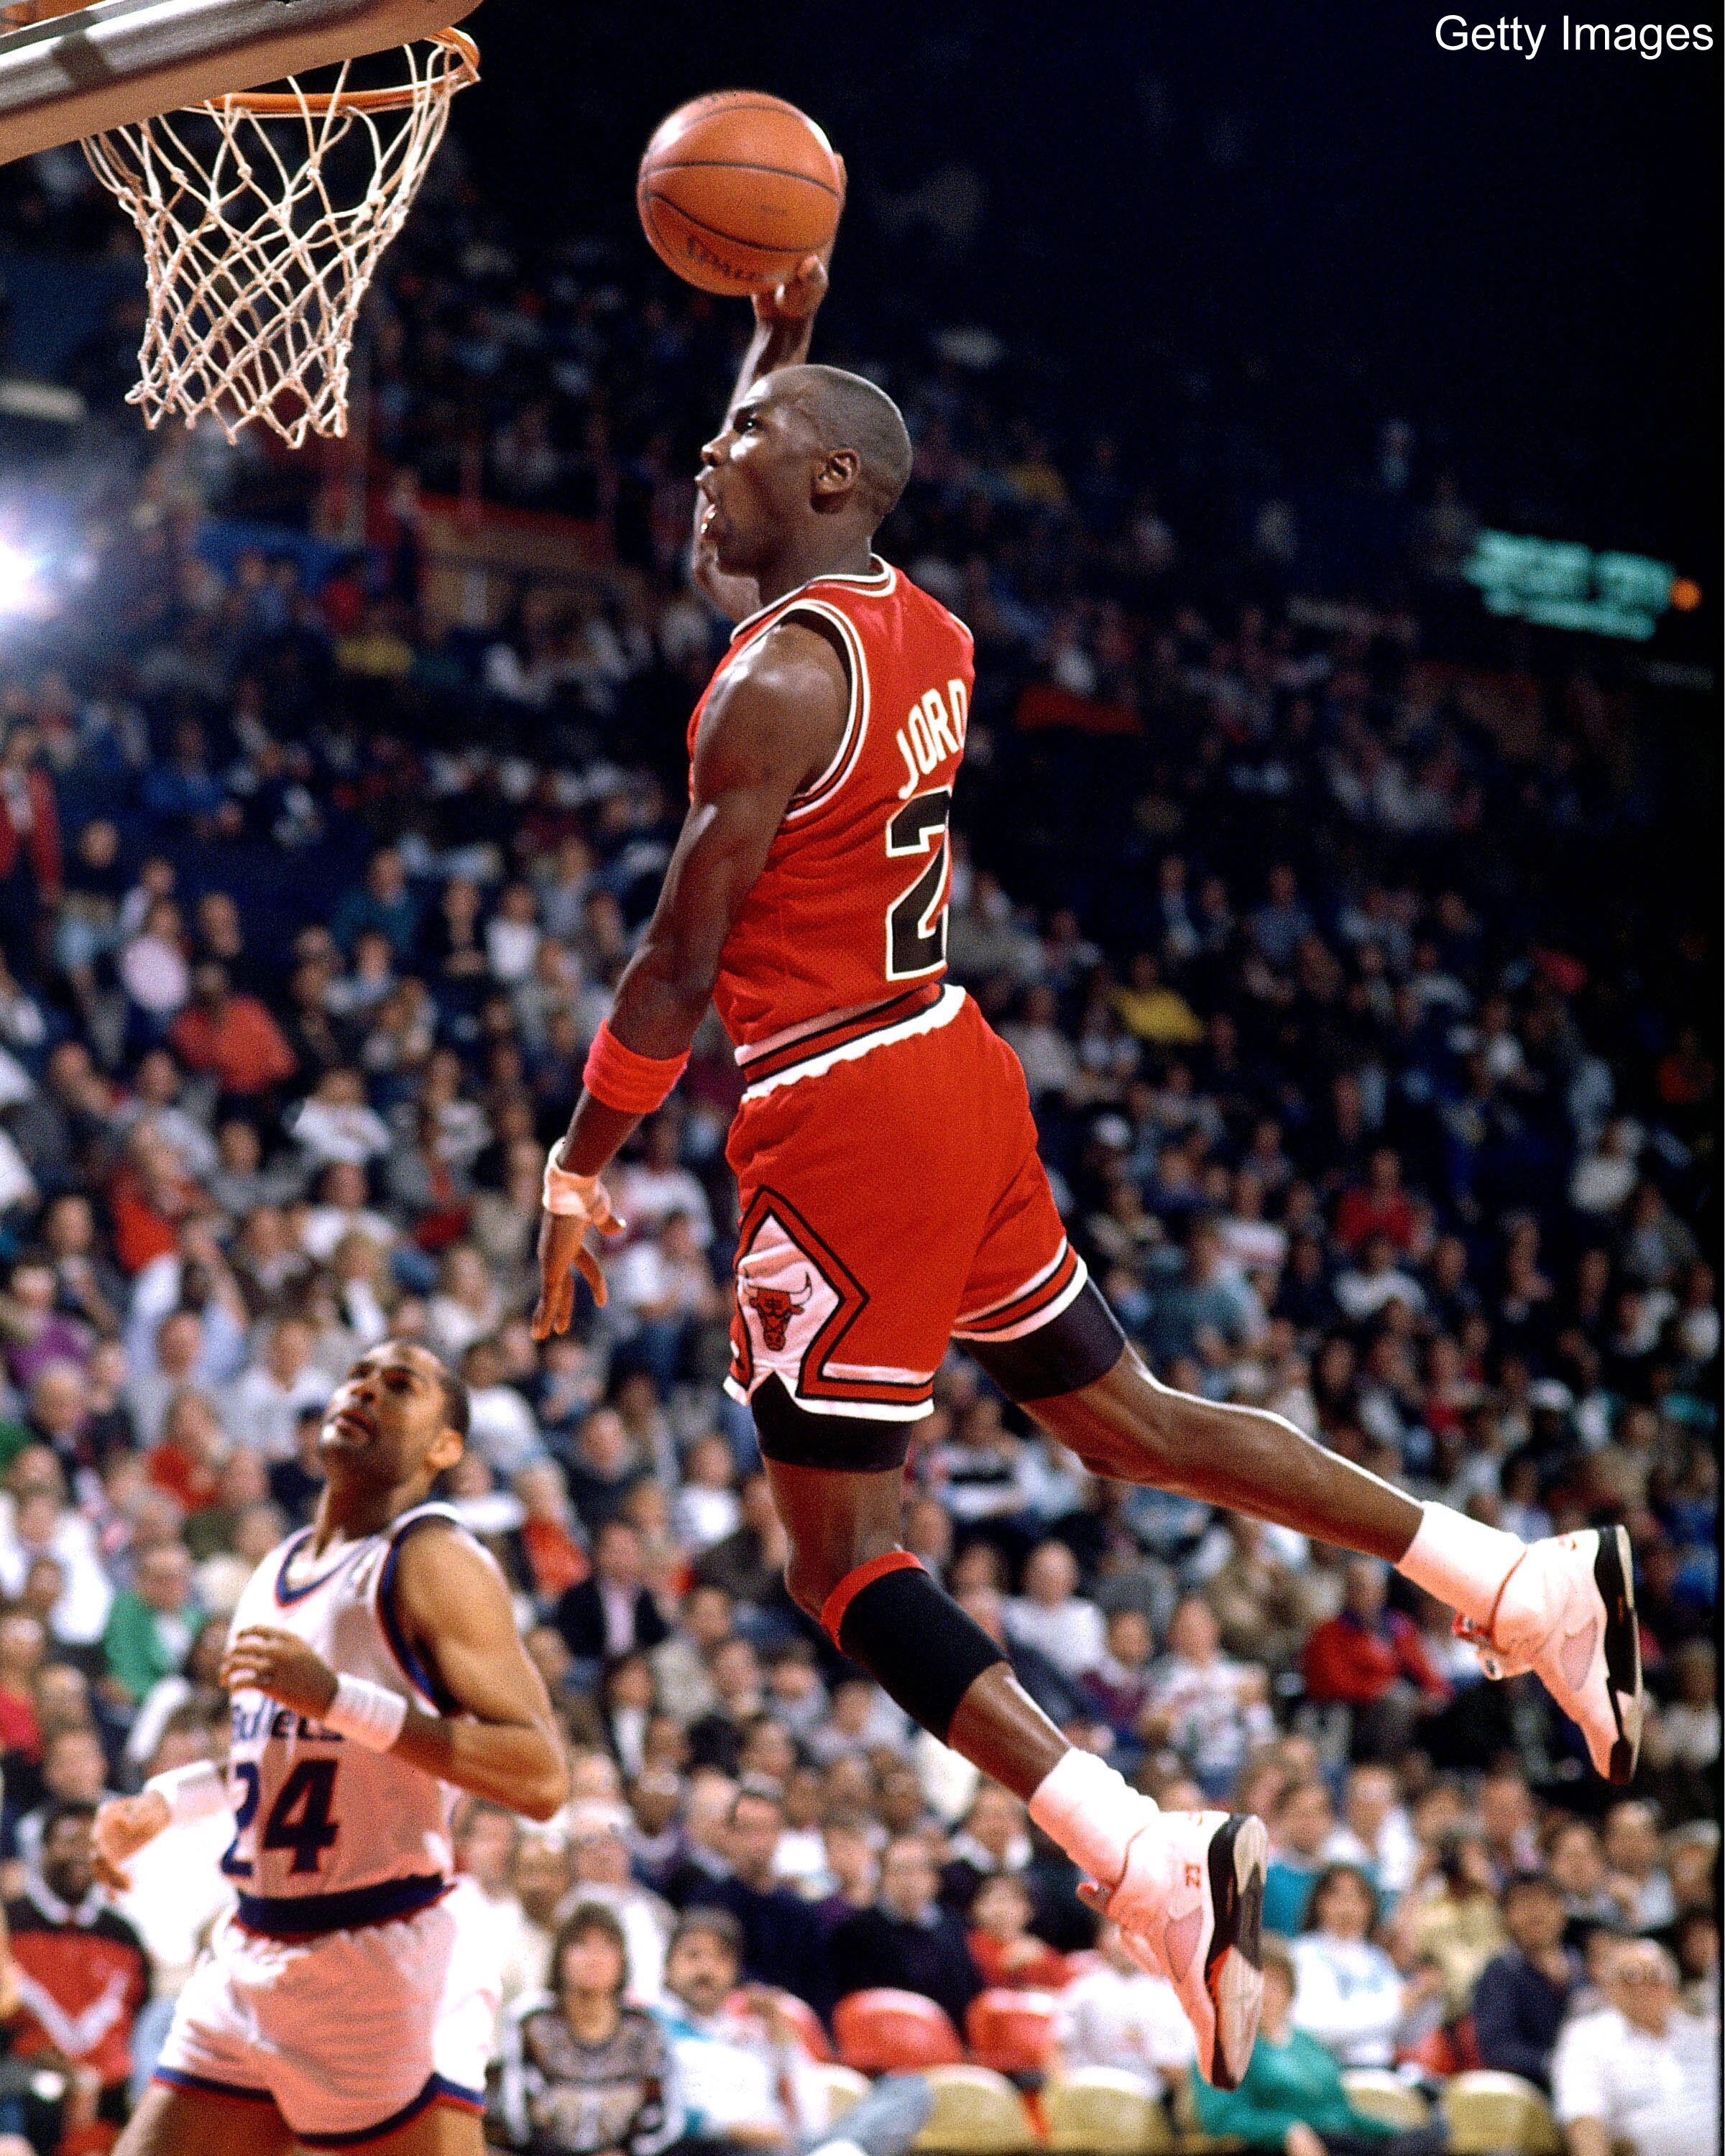 On This Day In 1993: Michael Jordan Scored His 20,000th Point | AmericanSportsHistory.com2400 x 3000